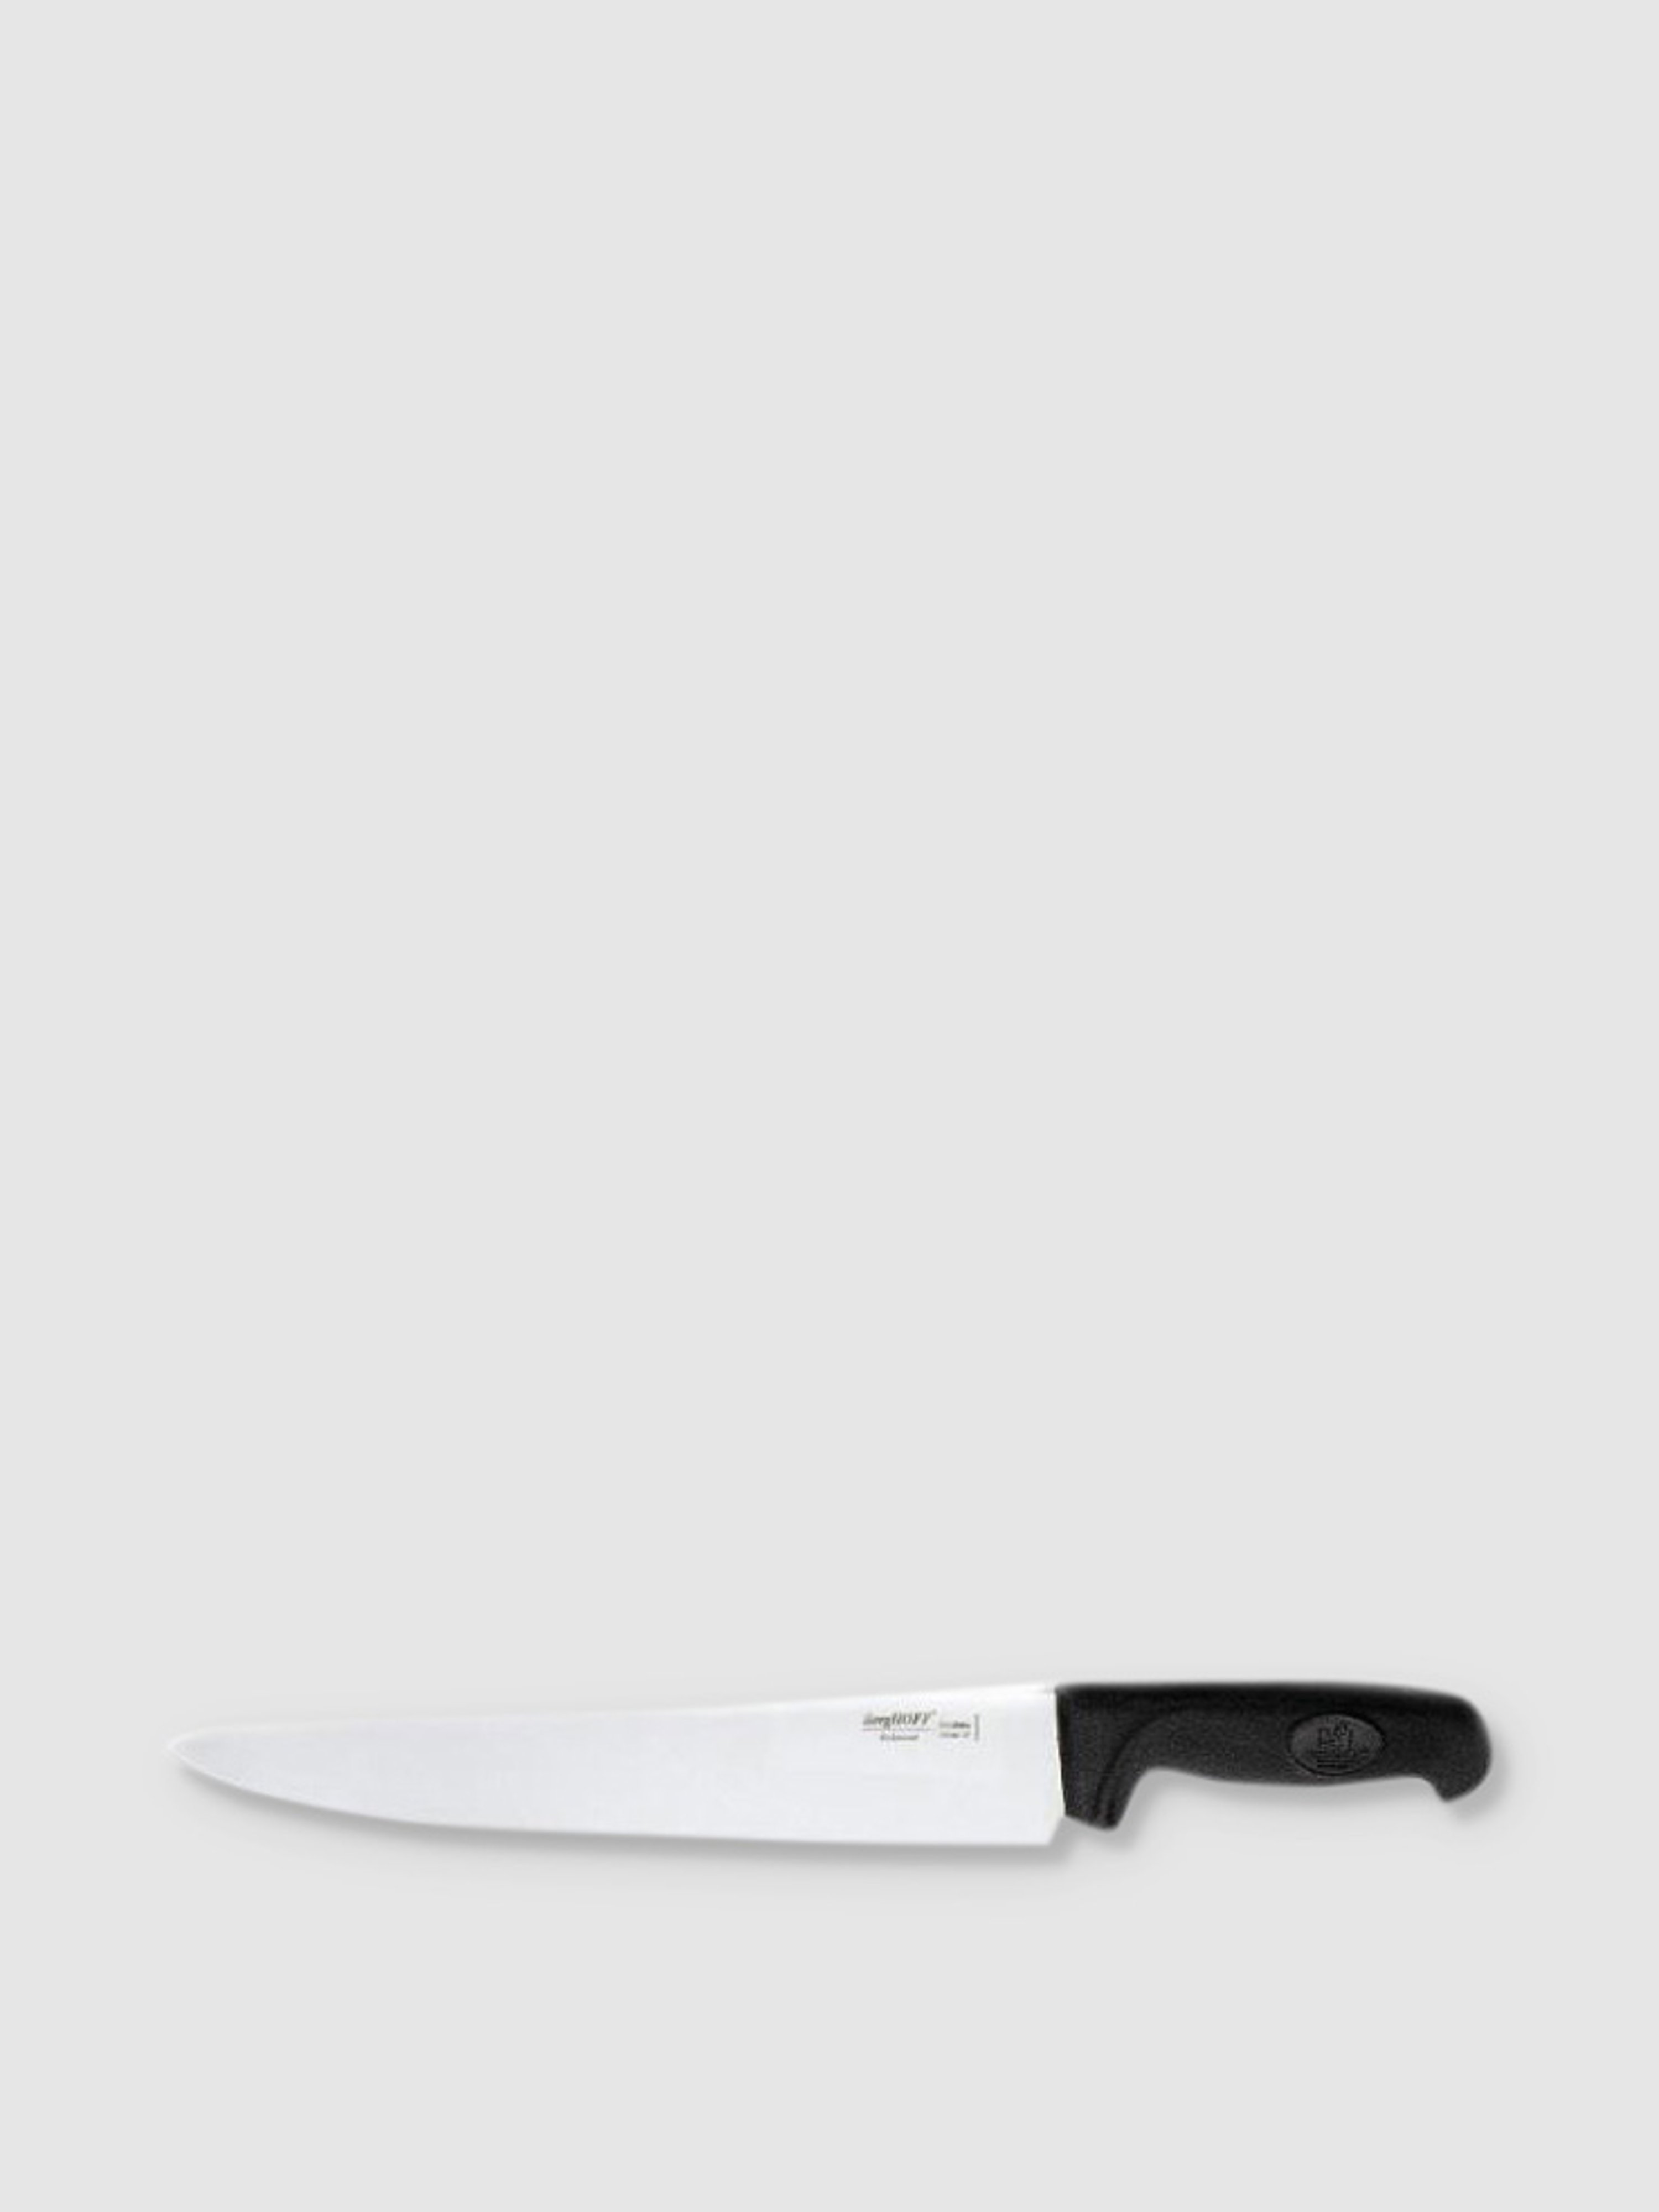 BERGHOFF BERGHOFF BERGHOFF SOFT GRIP 12" STAINLESS STEEL CHEF'S KNIFE